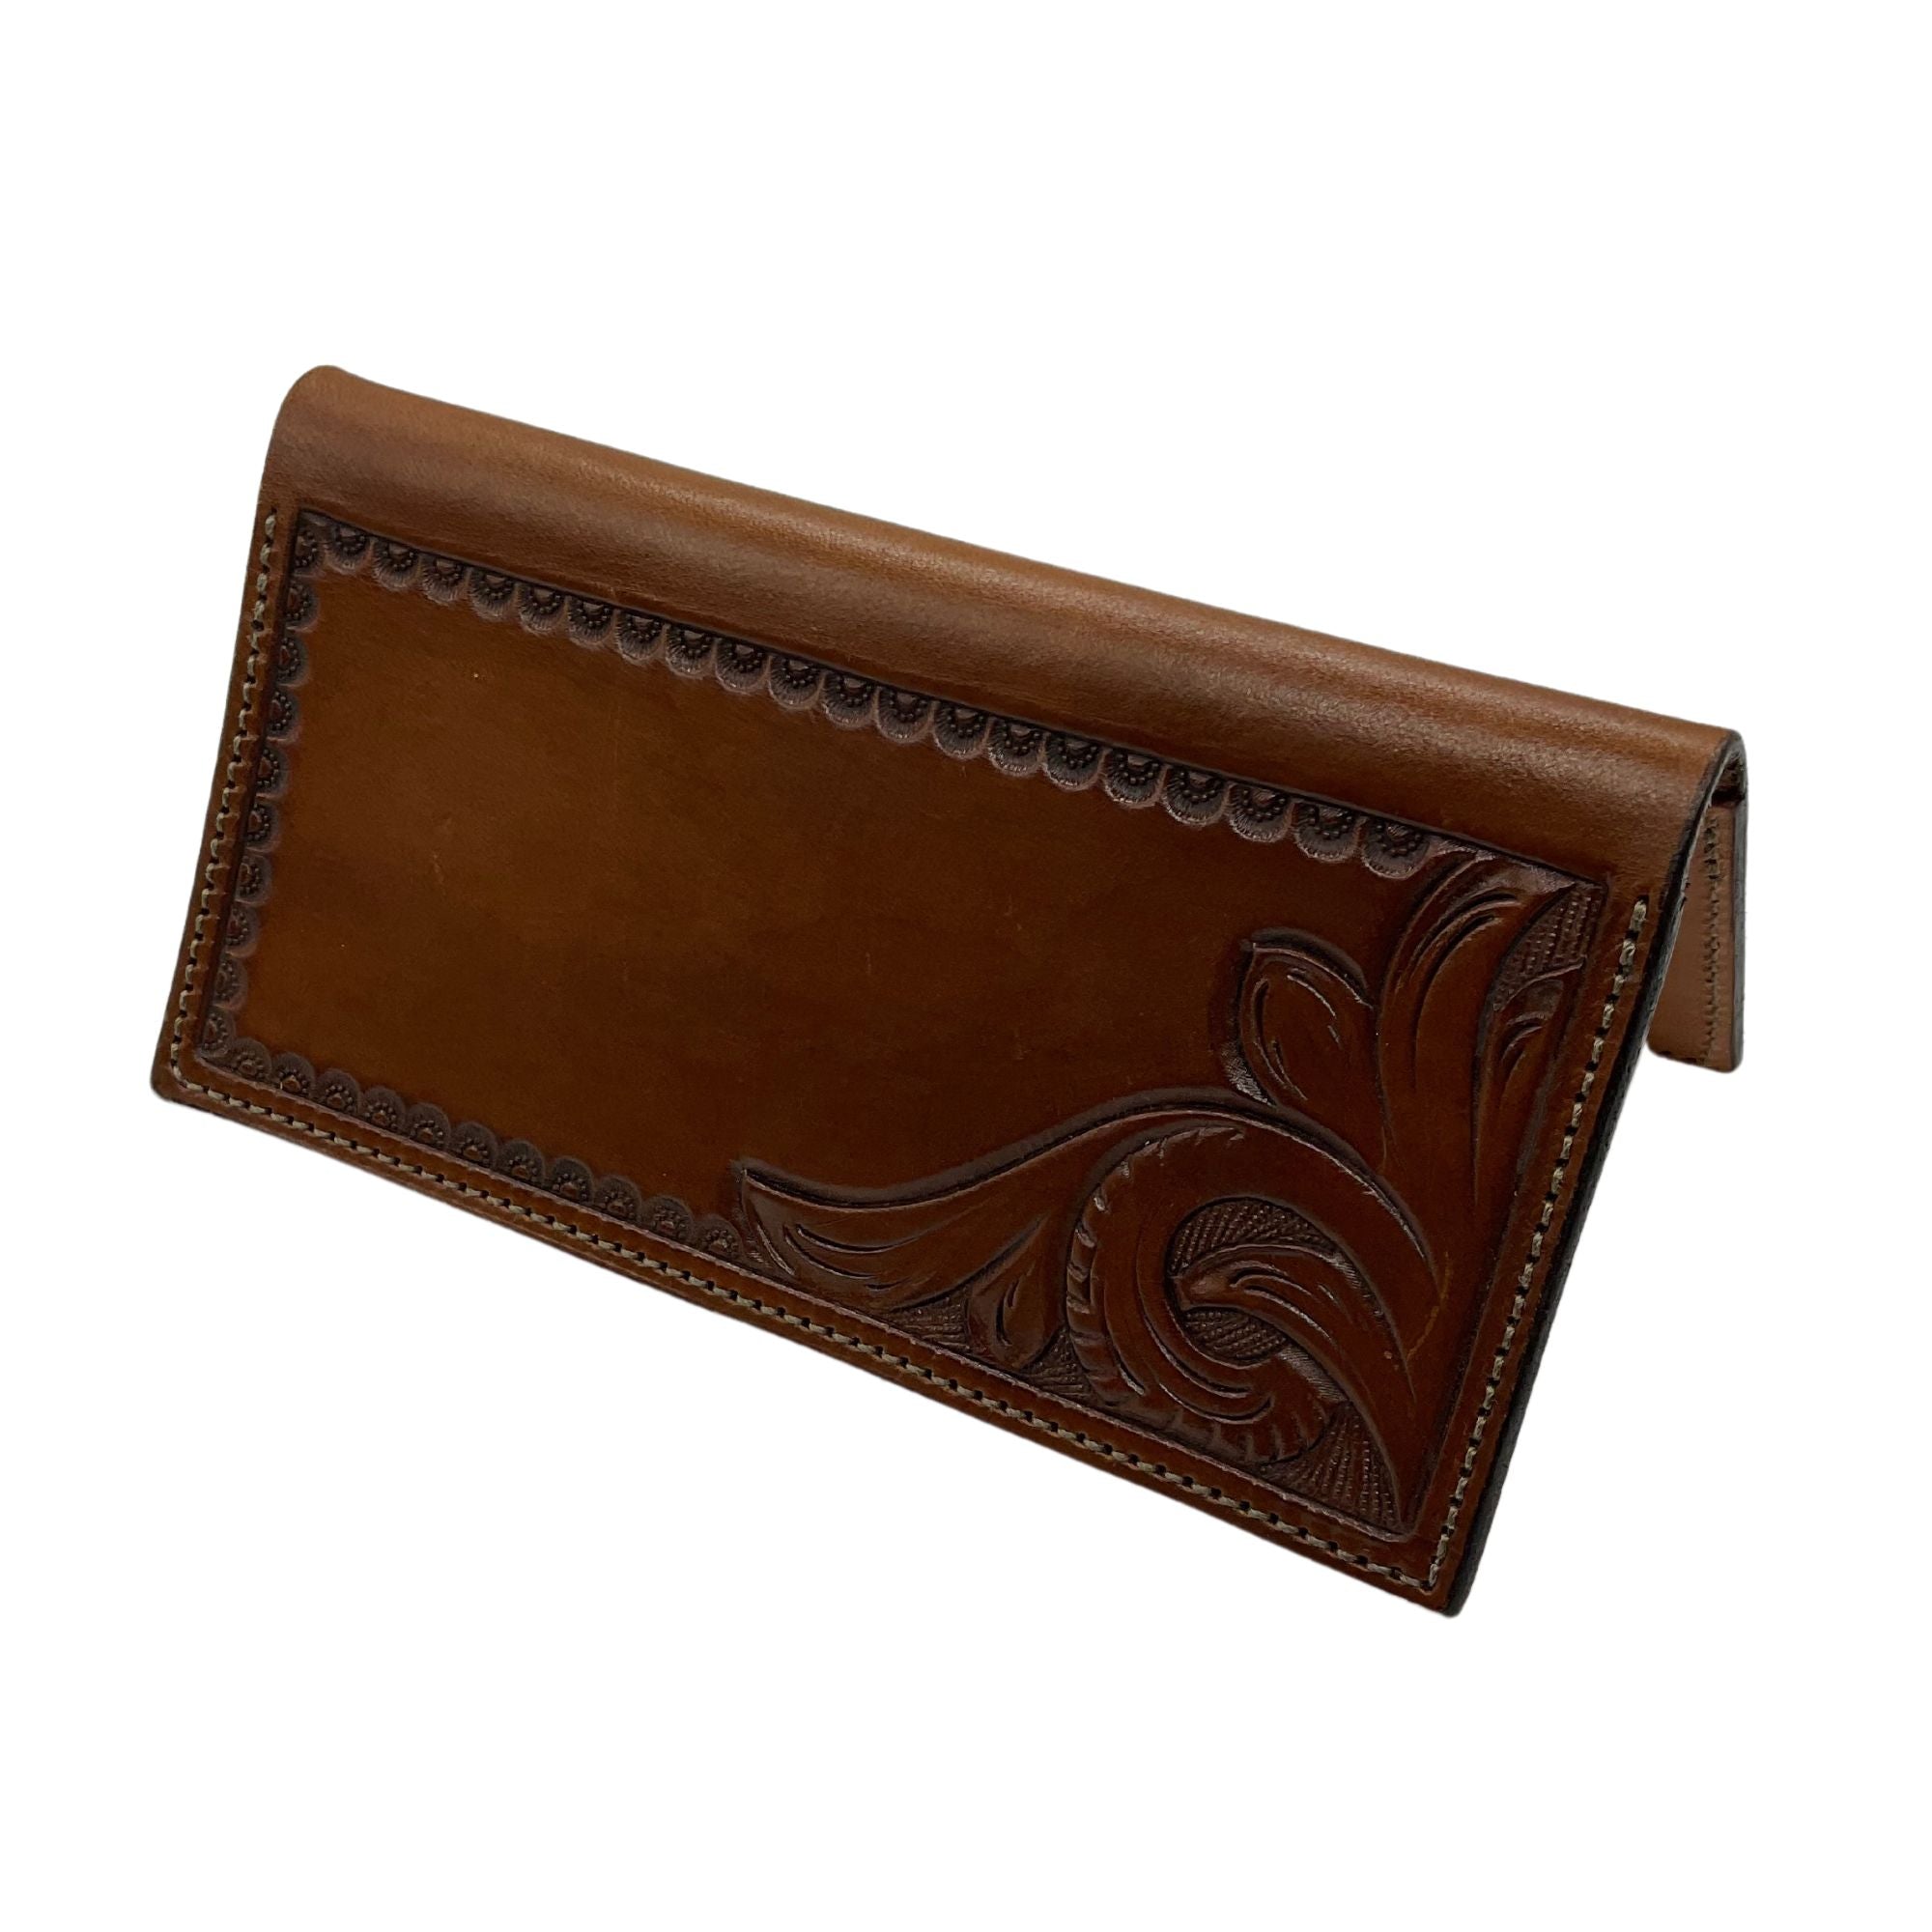 Wallet Project